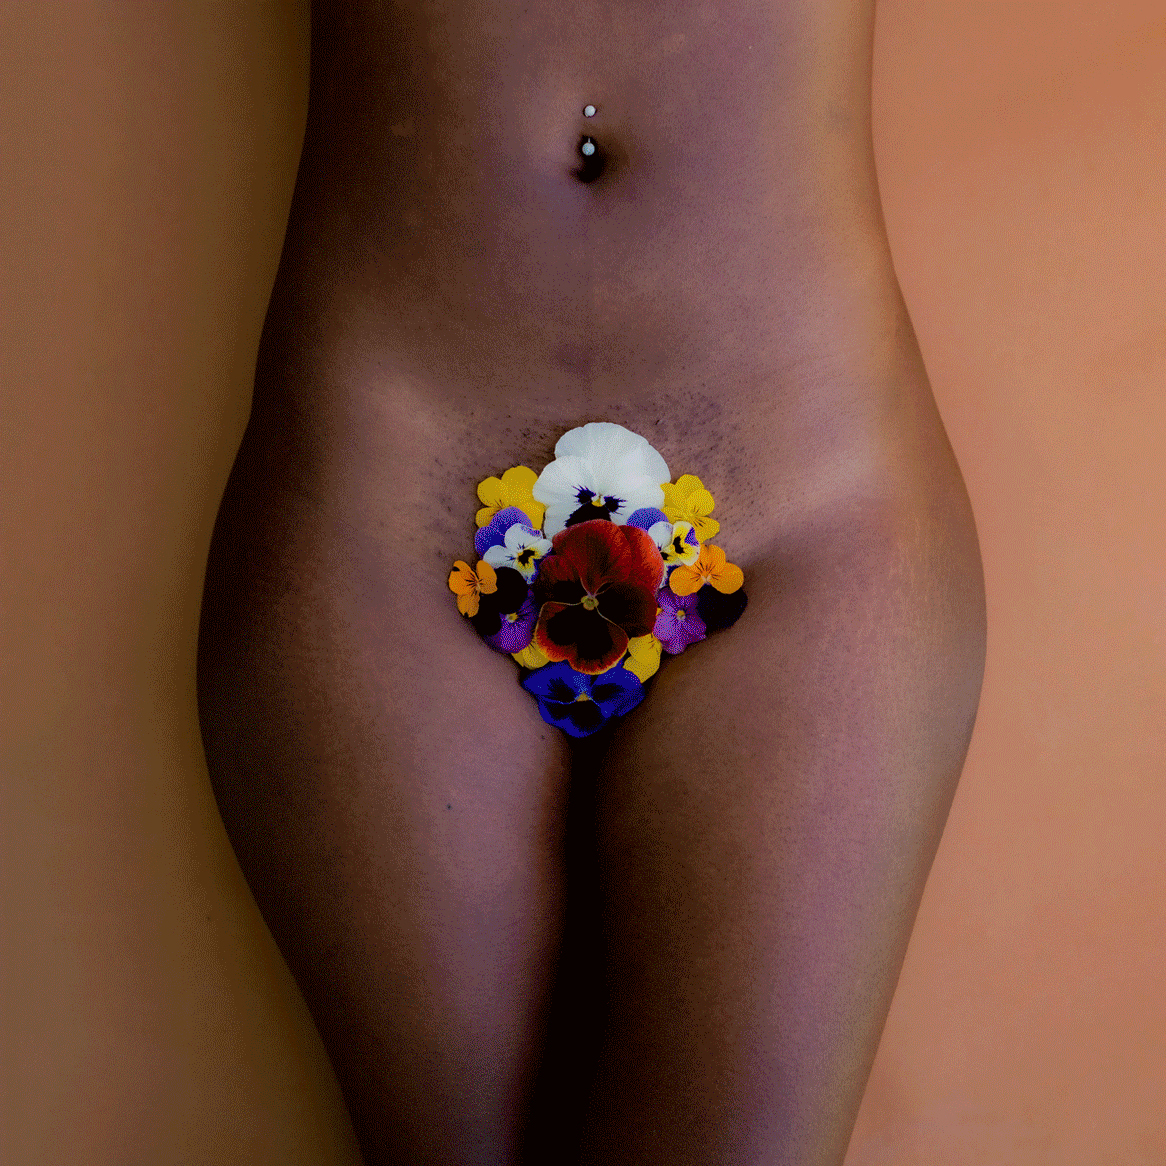 Women's lower bodies with flowers beautifully placed over their yonis